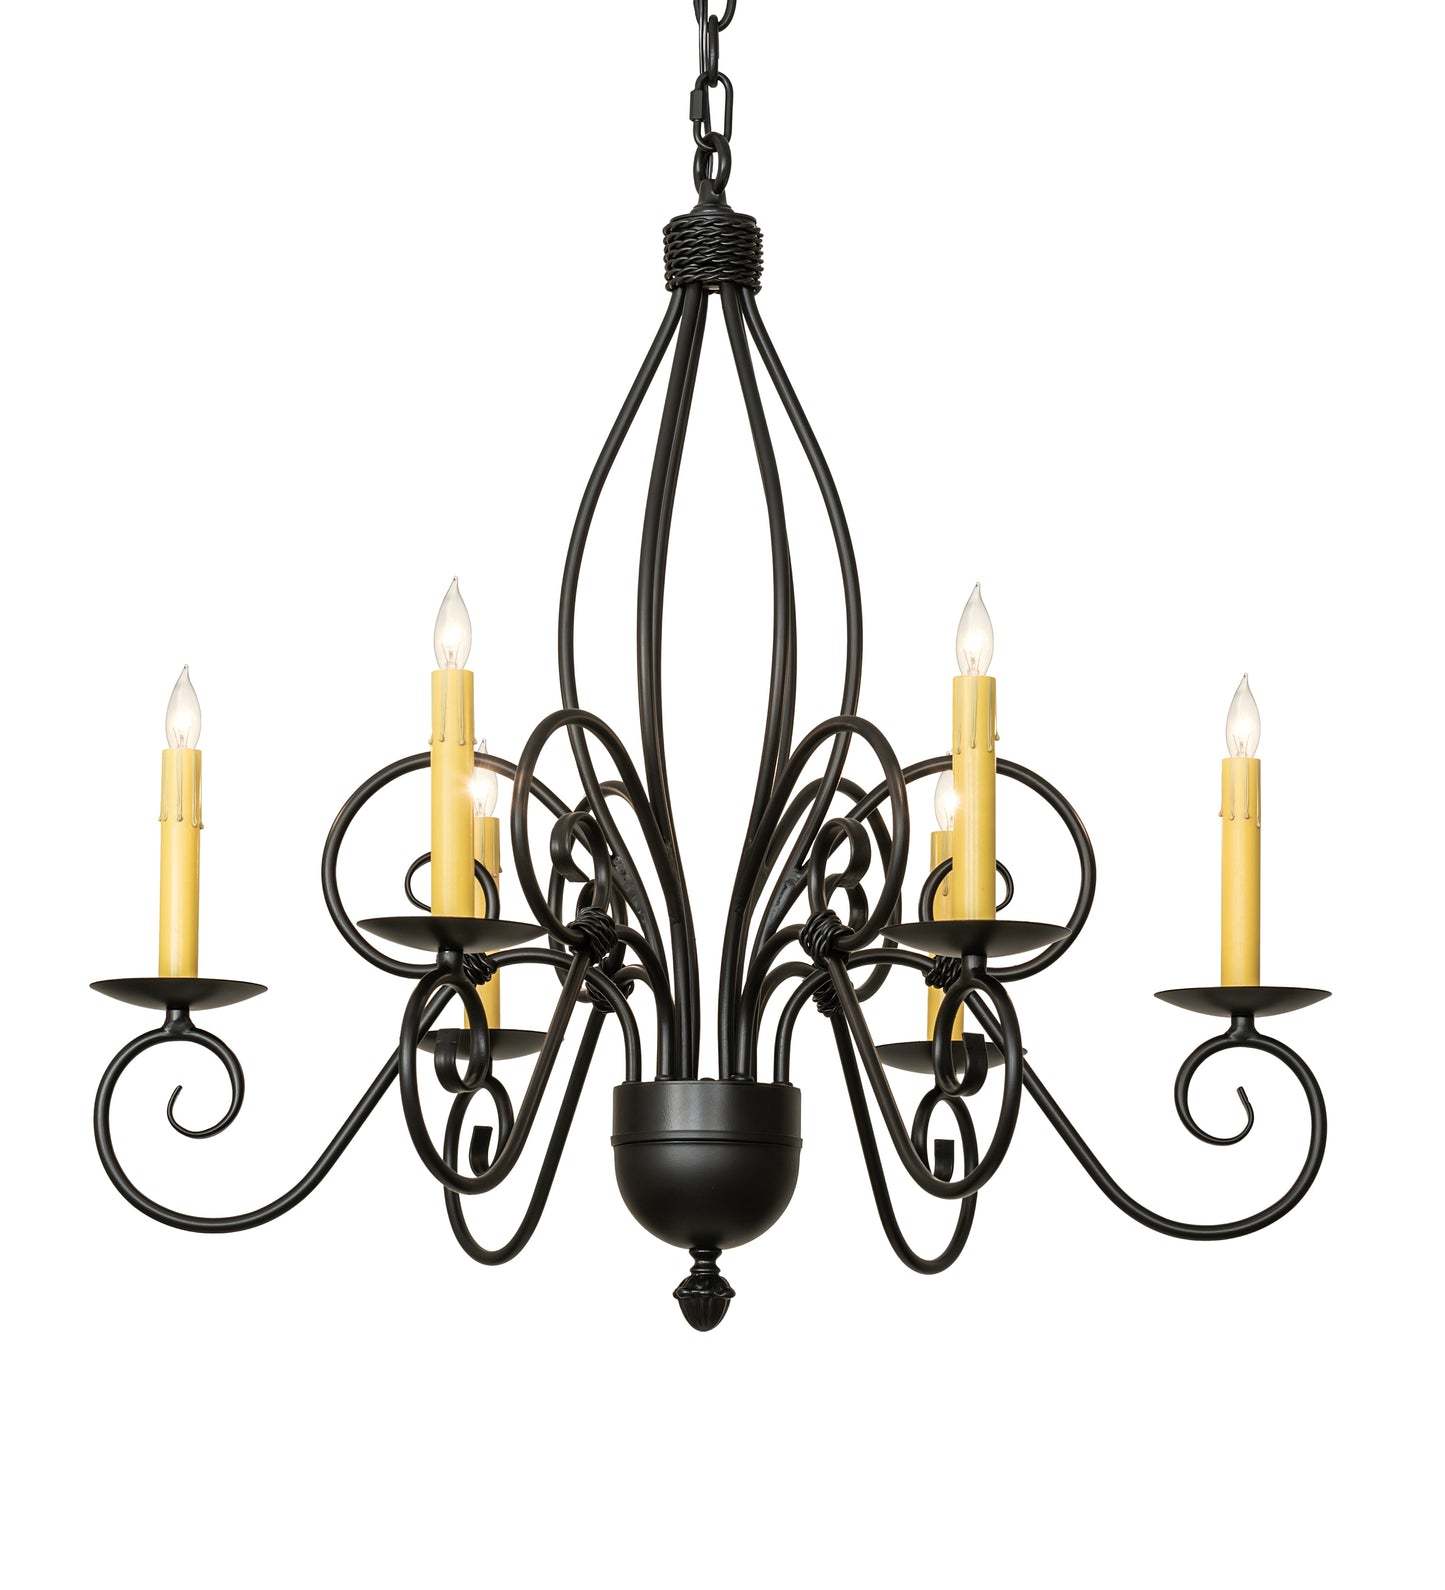 28" Squire 6-Light Chandelier by 2nd Ave Lighting